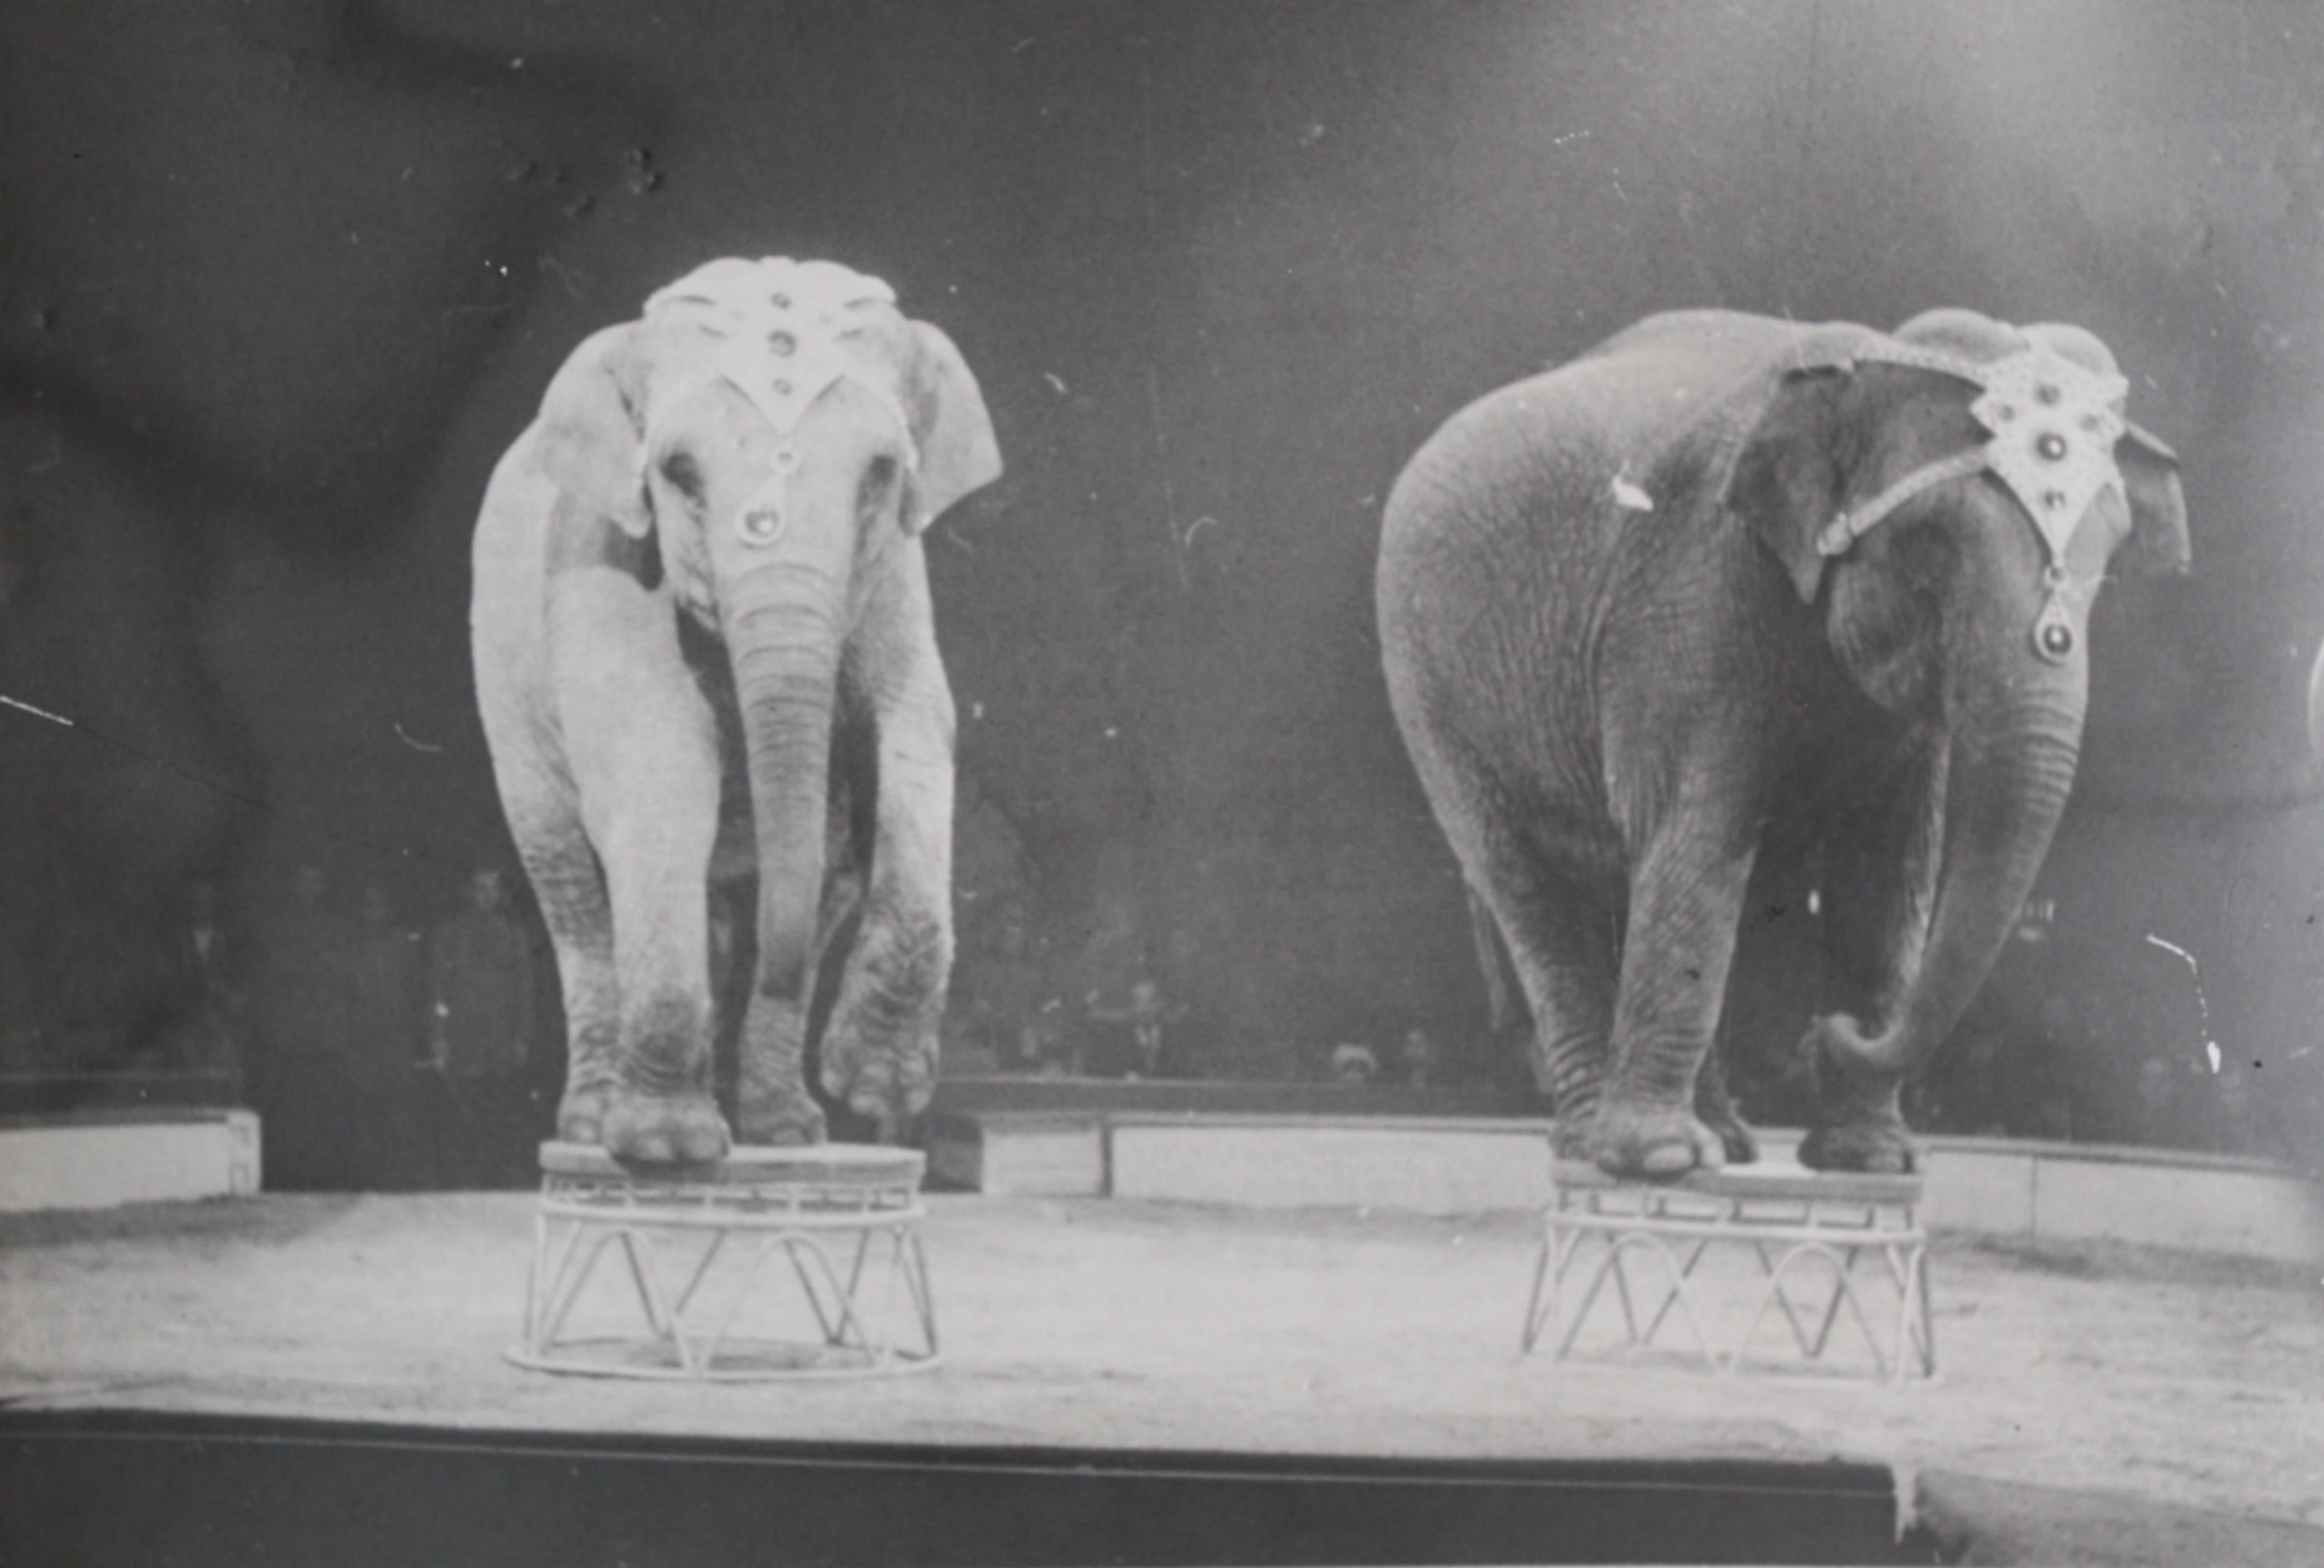 20th Century Circus Gelatin Silver Prints Photography in the Manner of Kurt Hutton circa 1940